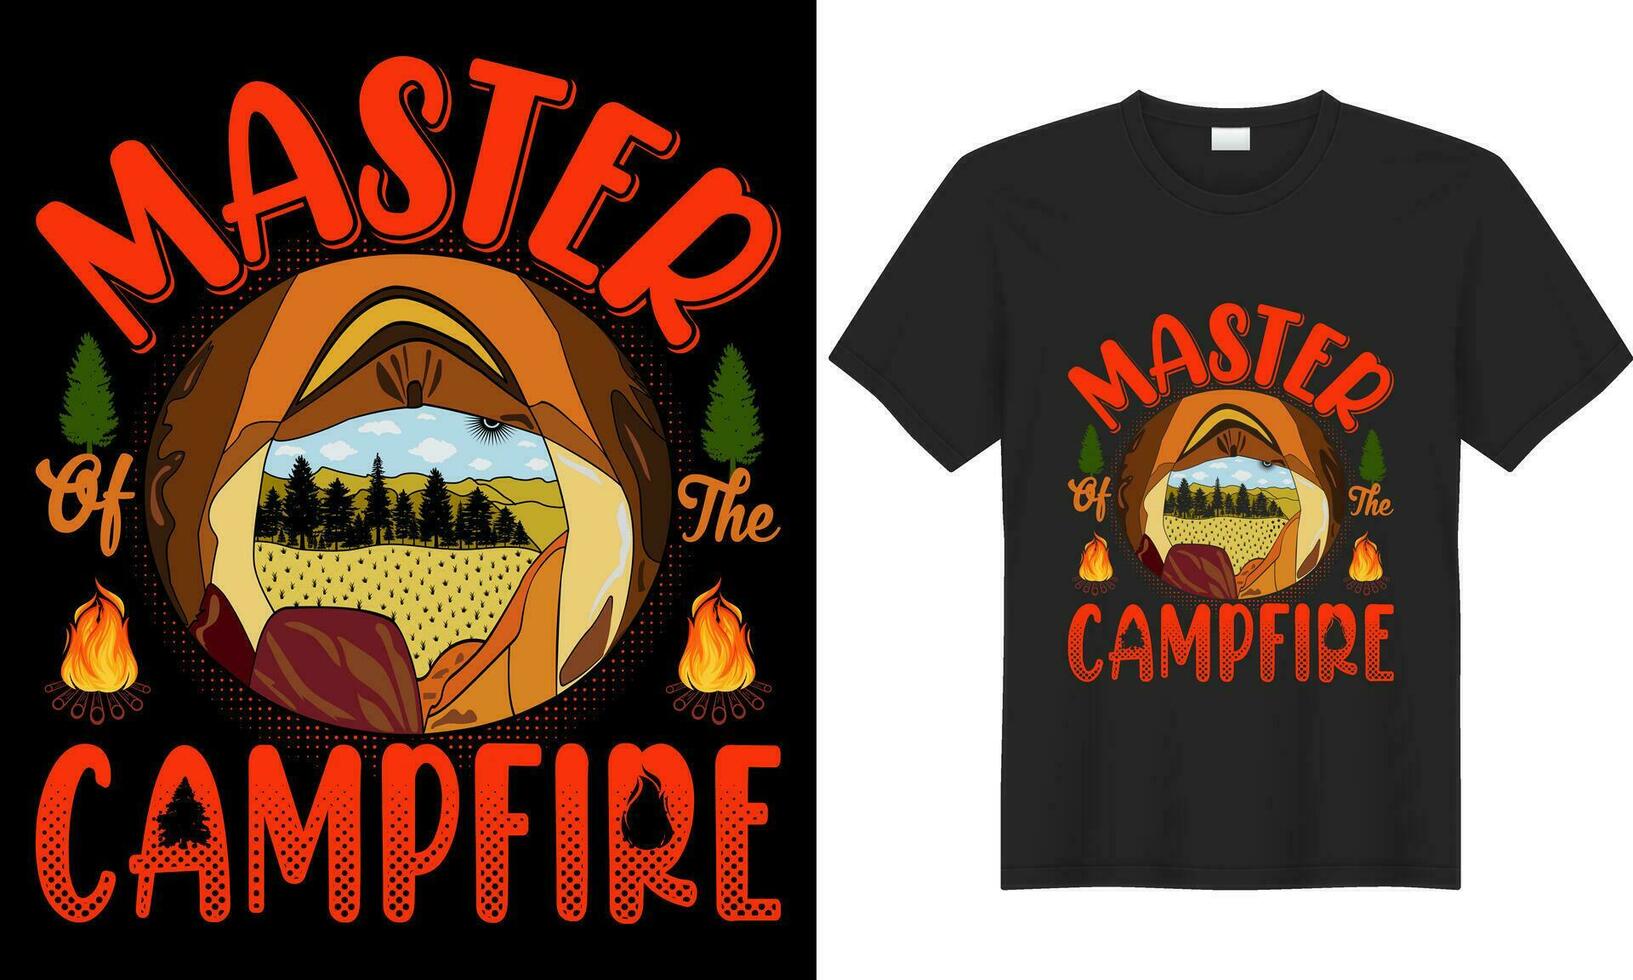 Camping vector graphic typography illustration tshirt design. Master of the campfire. Outdoor adventure mountain summer motivational quote hiking camper campfire print ready eps t-shirt design.